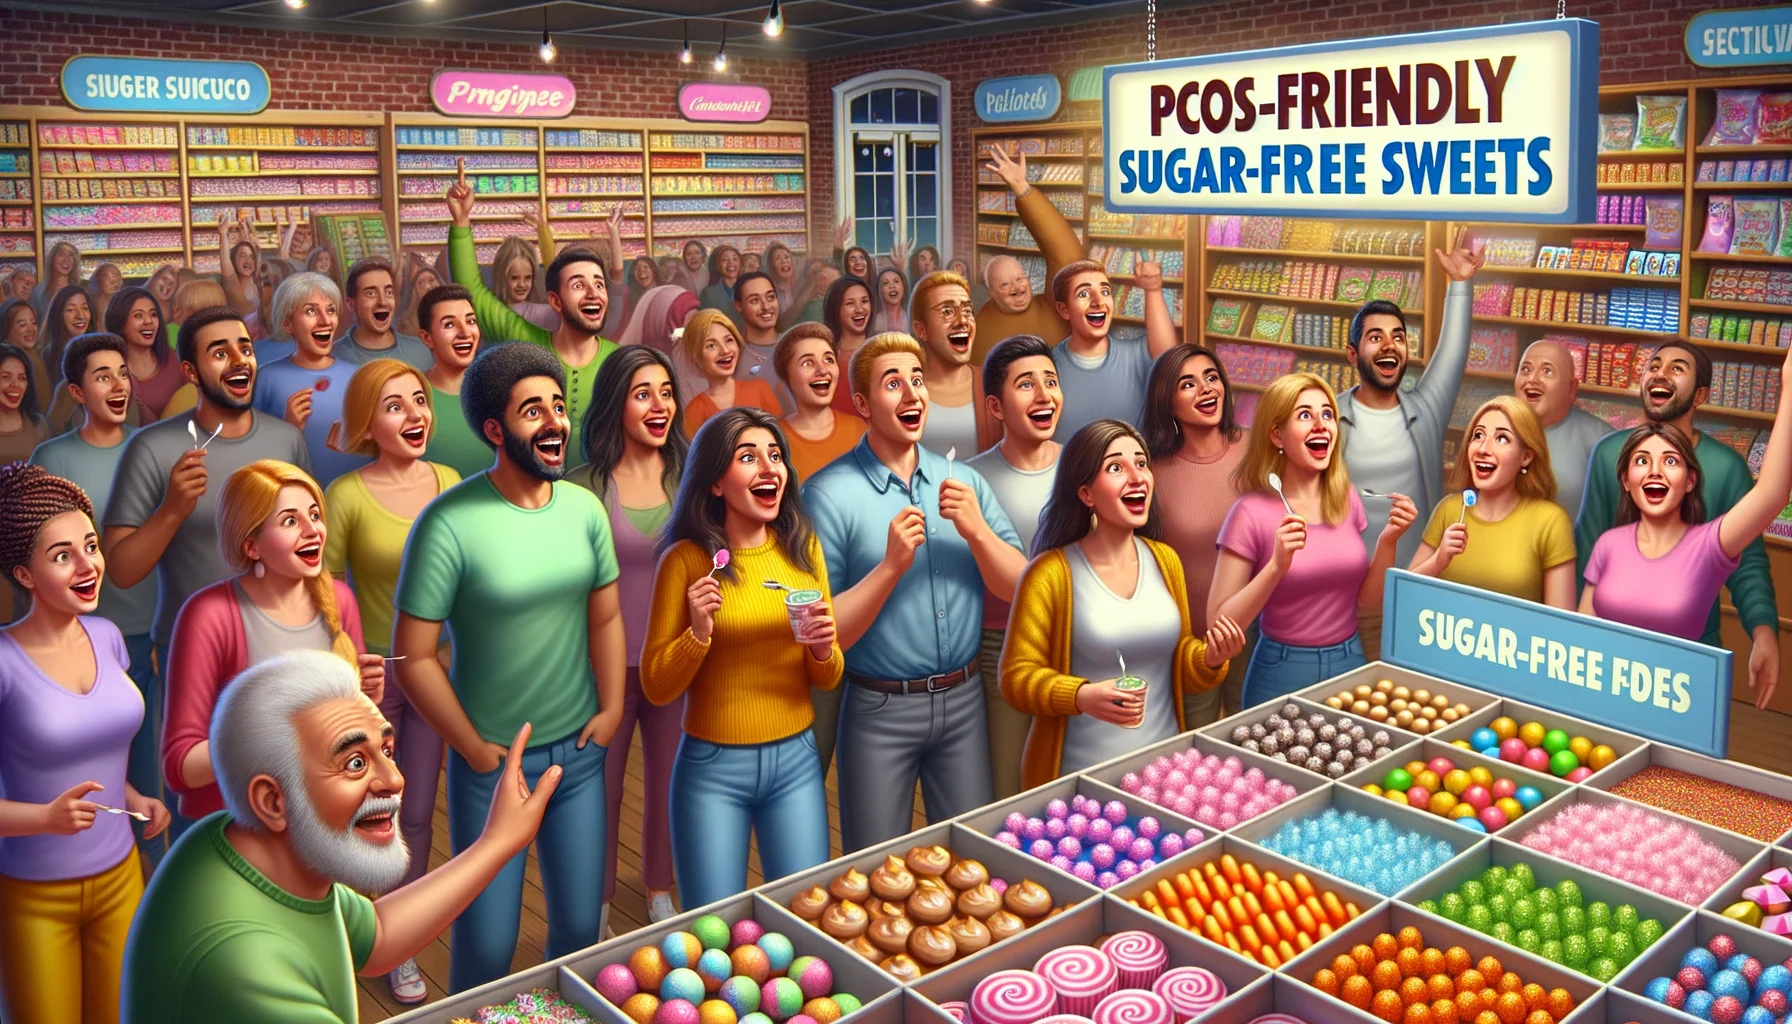 Imagine an amusing realistic scene in a candy shop. There's a prominent display labelled 'PCOS-Friendly Sugar-Free Sweets.' A diverse array of consumer representing every descent, from Hispanic, South Asian to Middle-Eastern and Caucasian, men and women enjoying the delights from this section of the store. Delighted - yet with humorously surprised expressions - as they find treats that cater specifically to them. The scene is filled with vibrant sweets of different colors and shapes, all of which are sugar-free and specially formulated for those with PCOS, accentuating the idea that everyone can enjoy confectionery without any concerns.